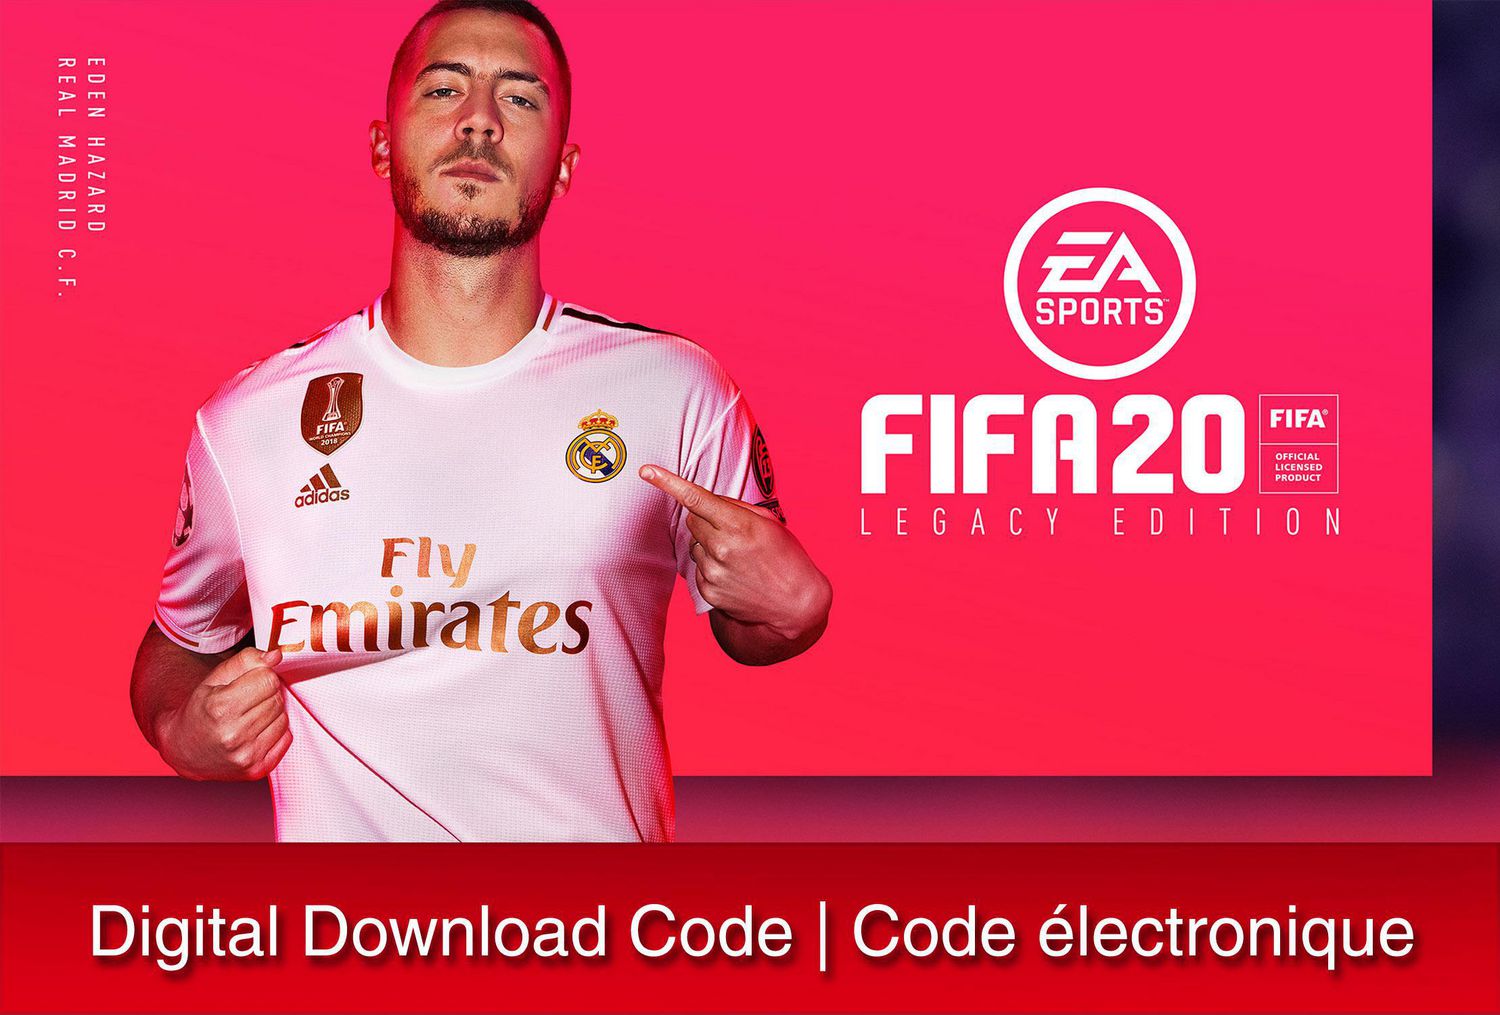 fifa 20 for nintendo switch